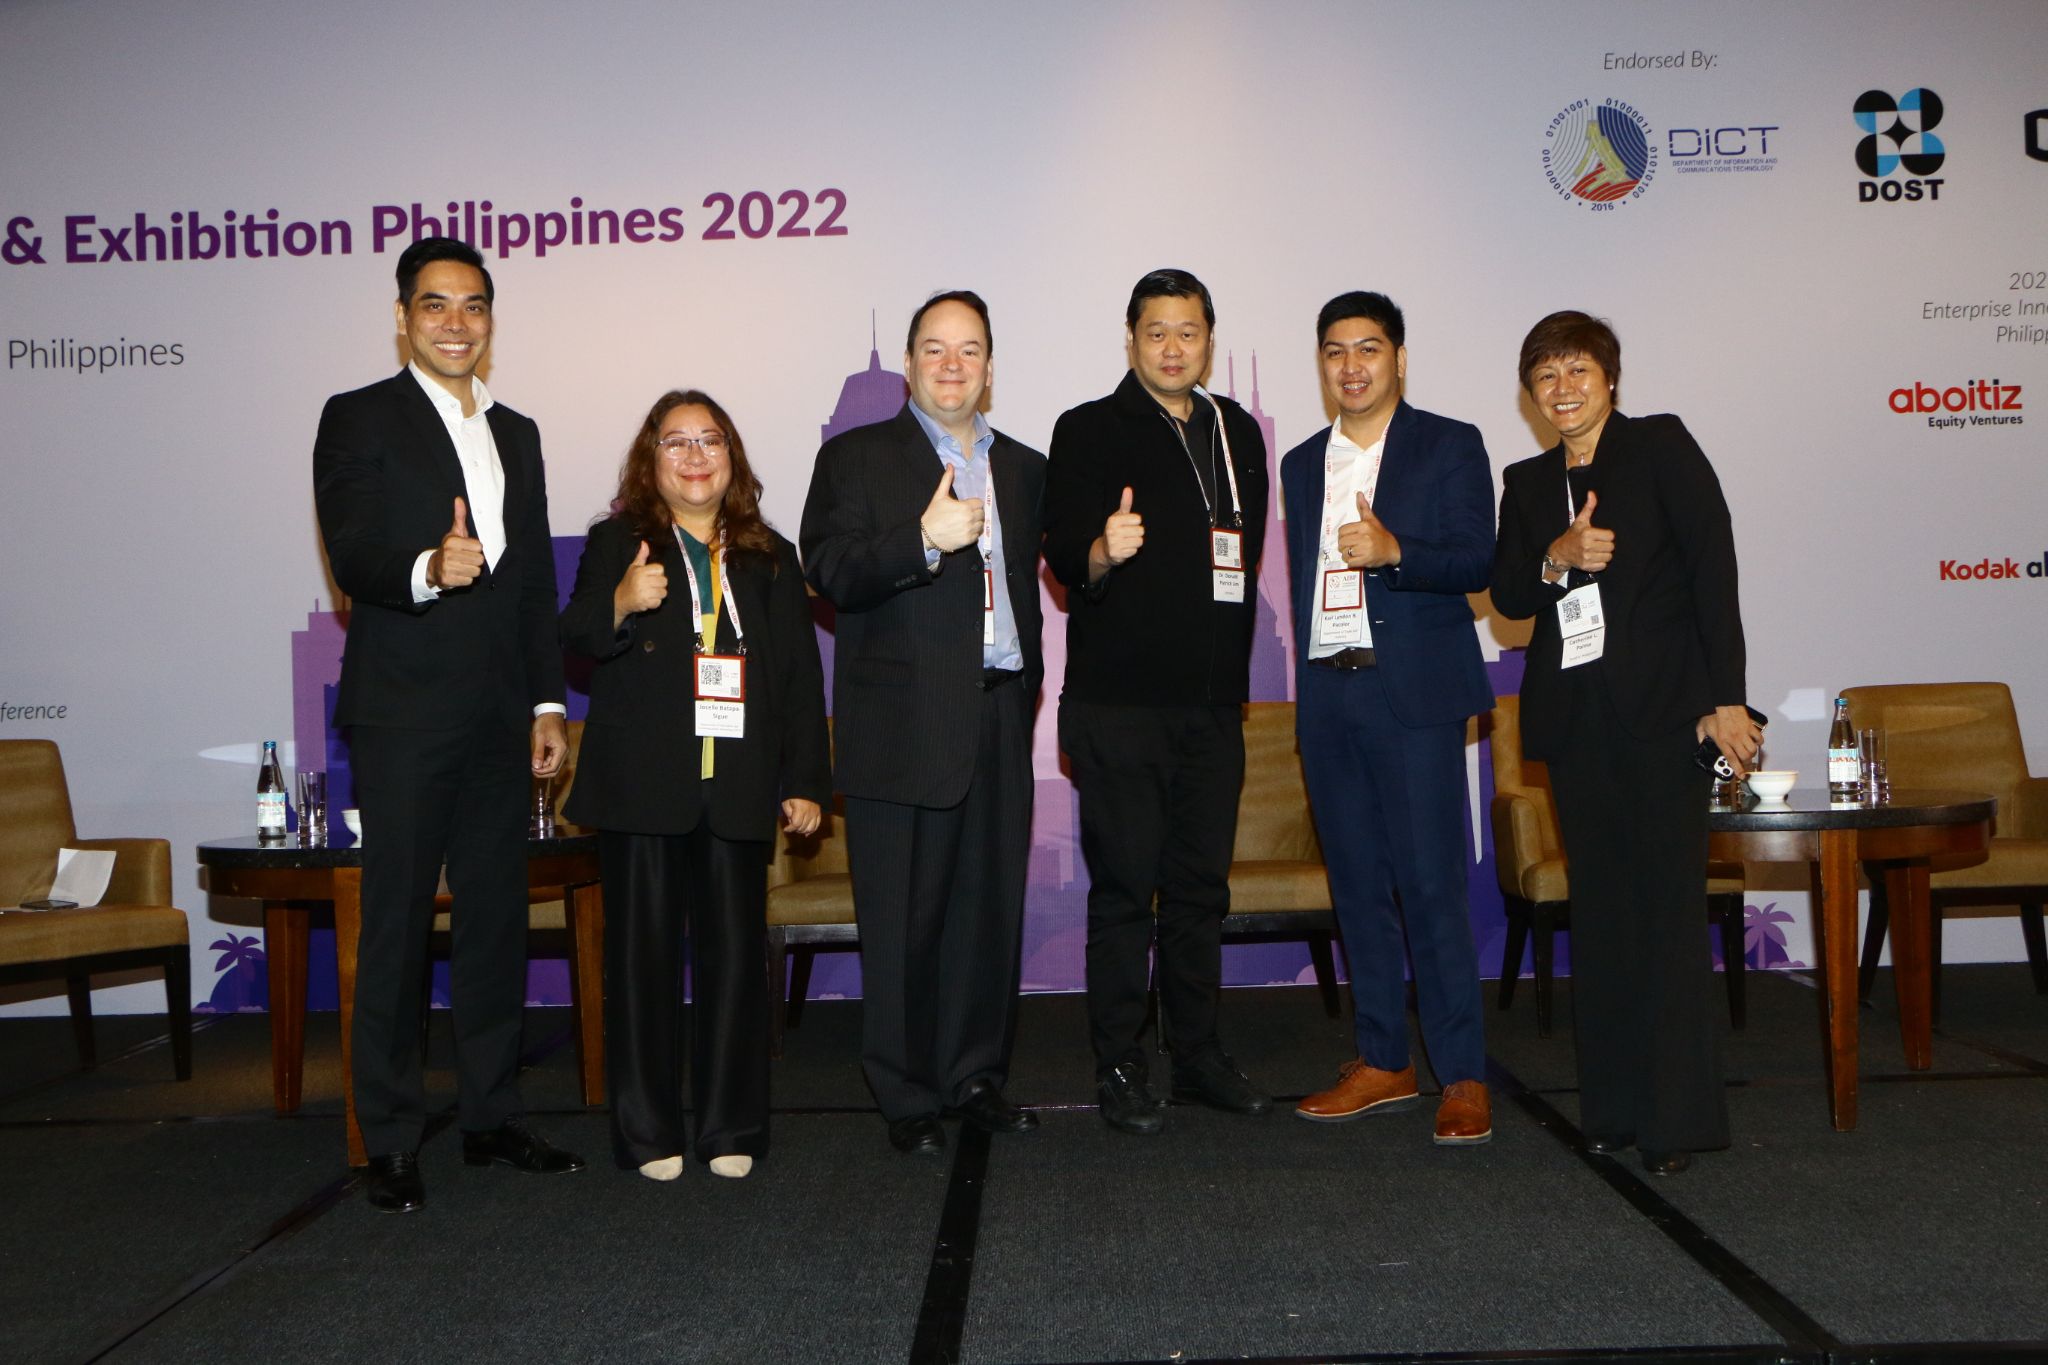 Aboitiz Group CFO featured in keynote on sustainable growth and tech